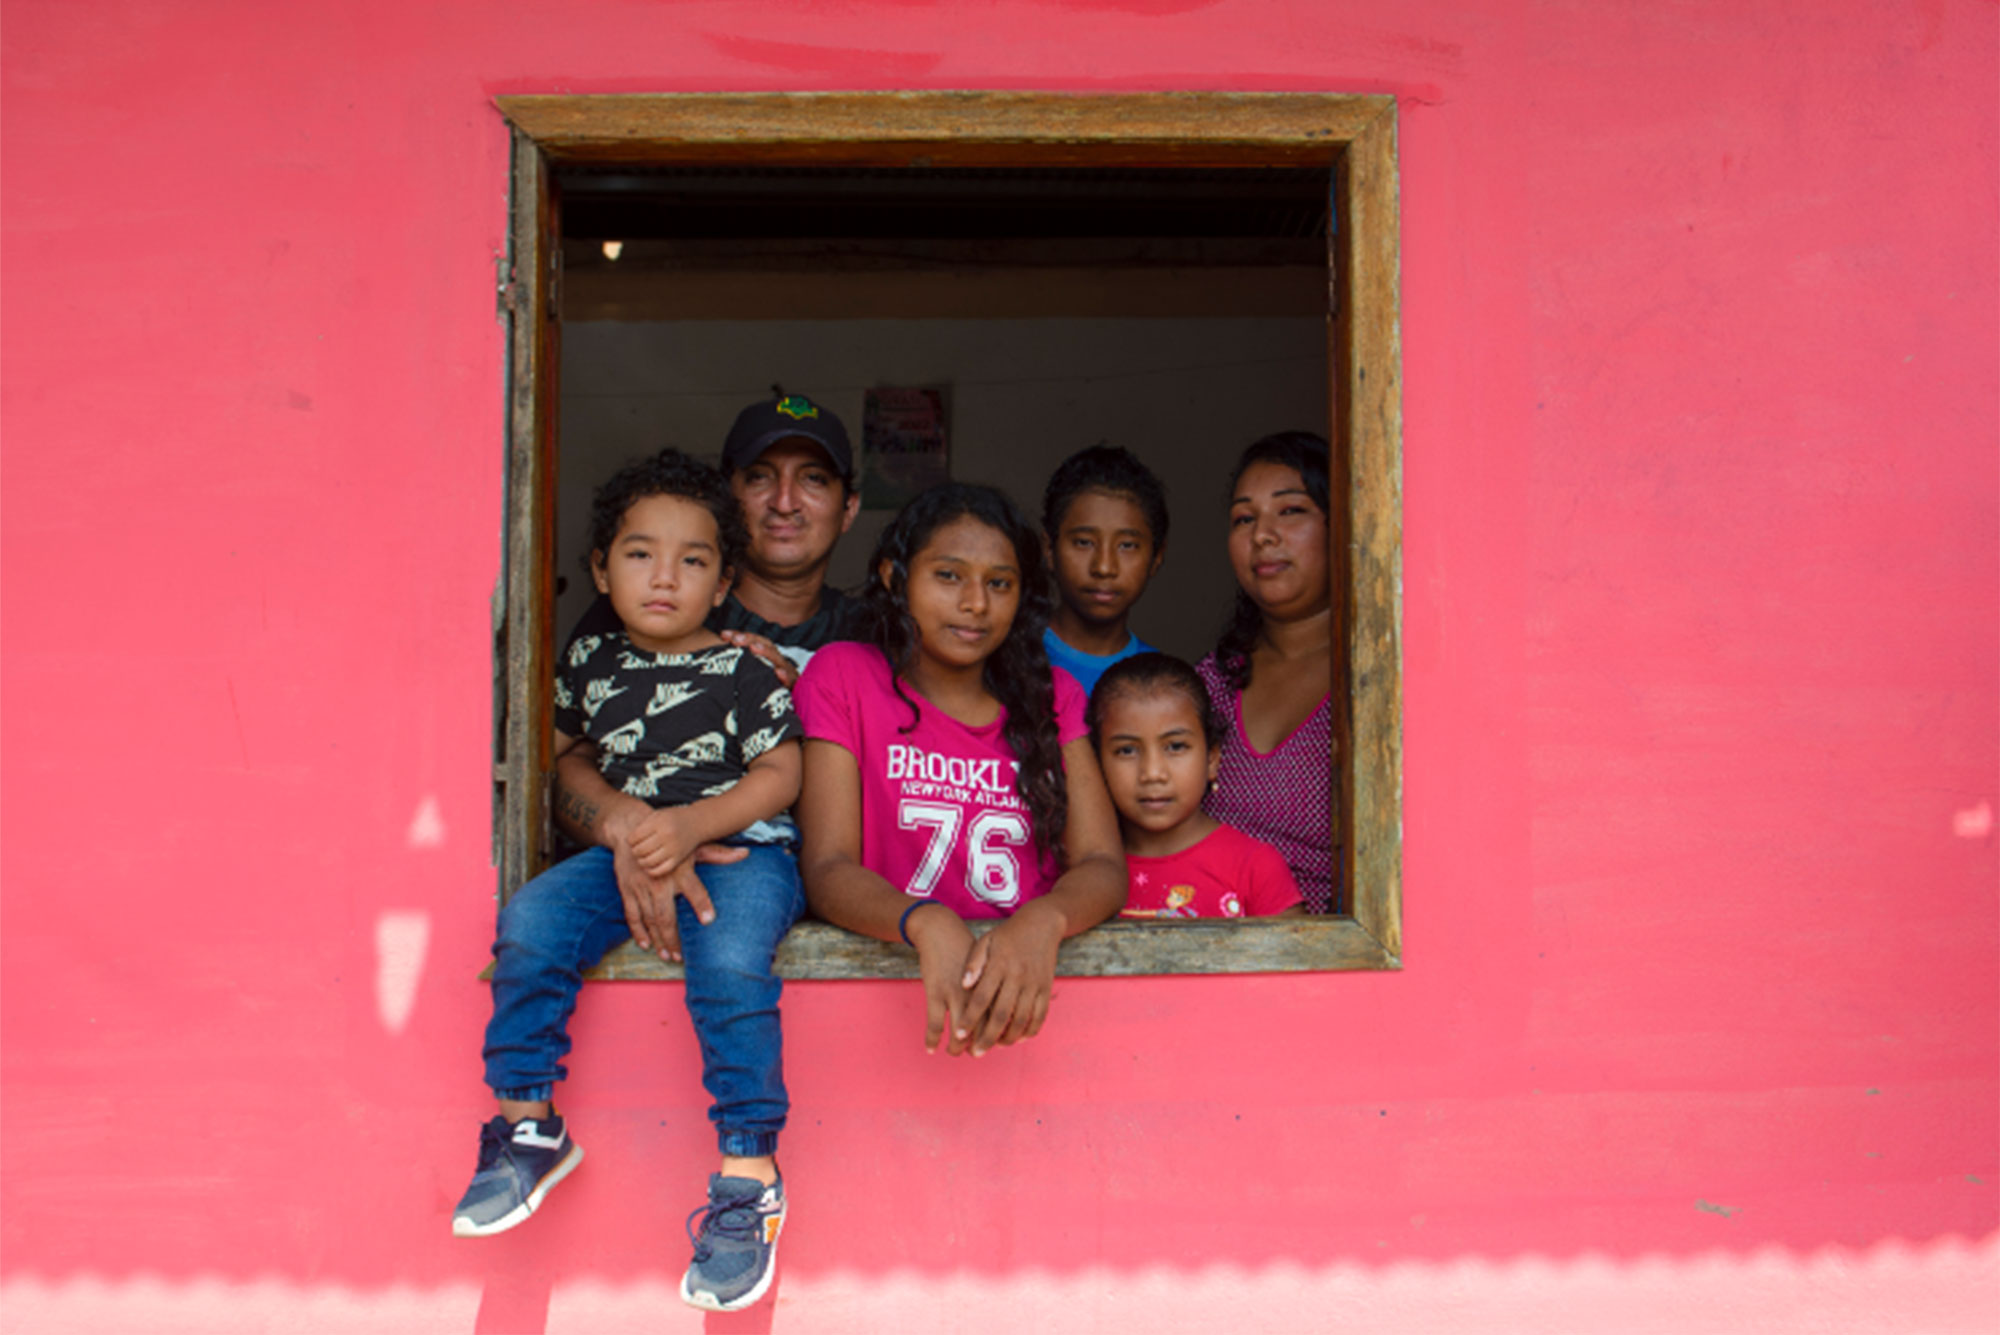 Family group looking through a window surrounded by pink wall